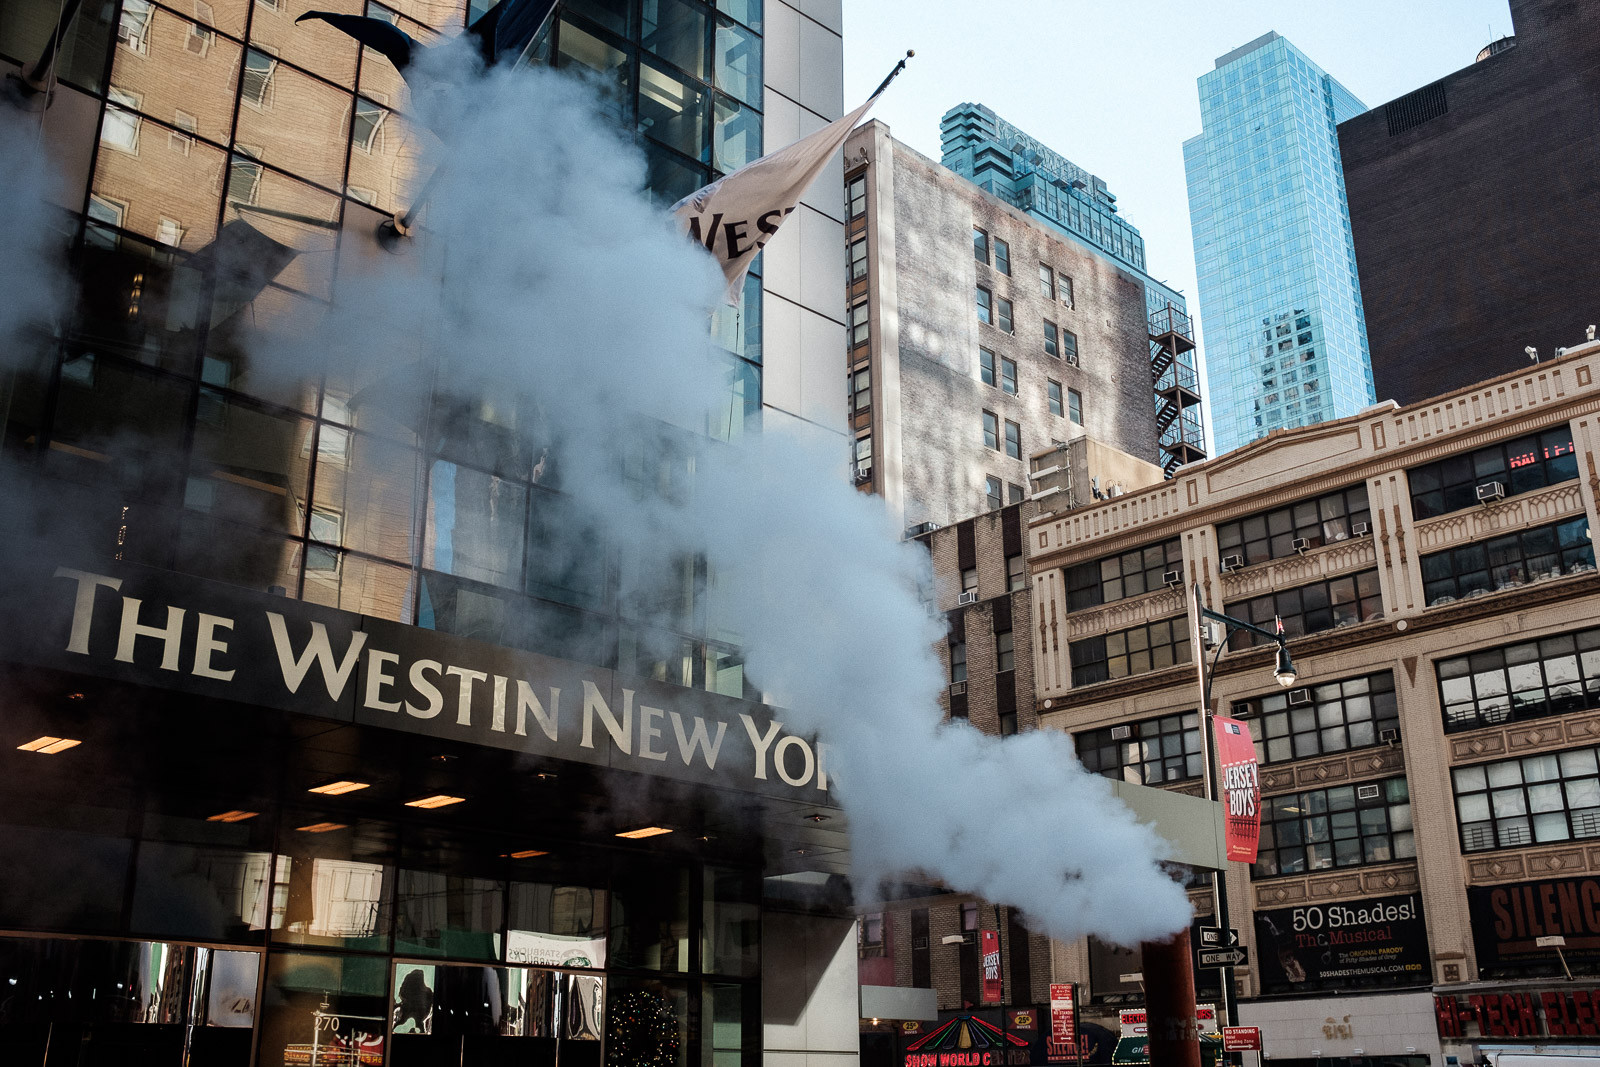 the westin new york grand central with steam from sewers